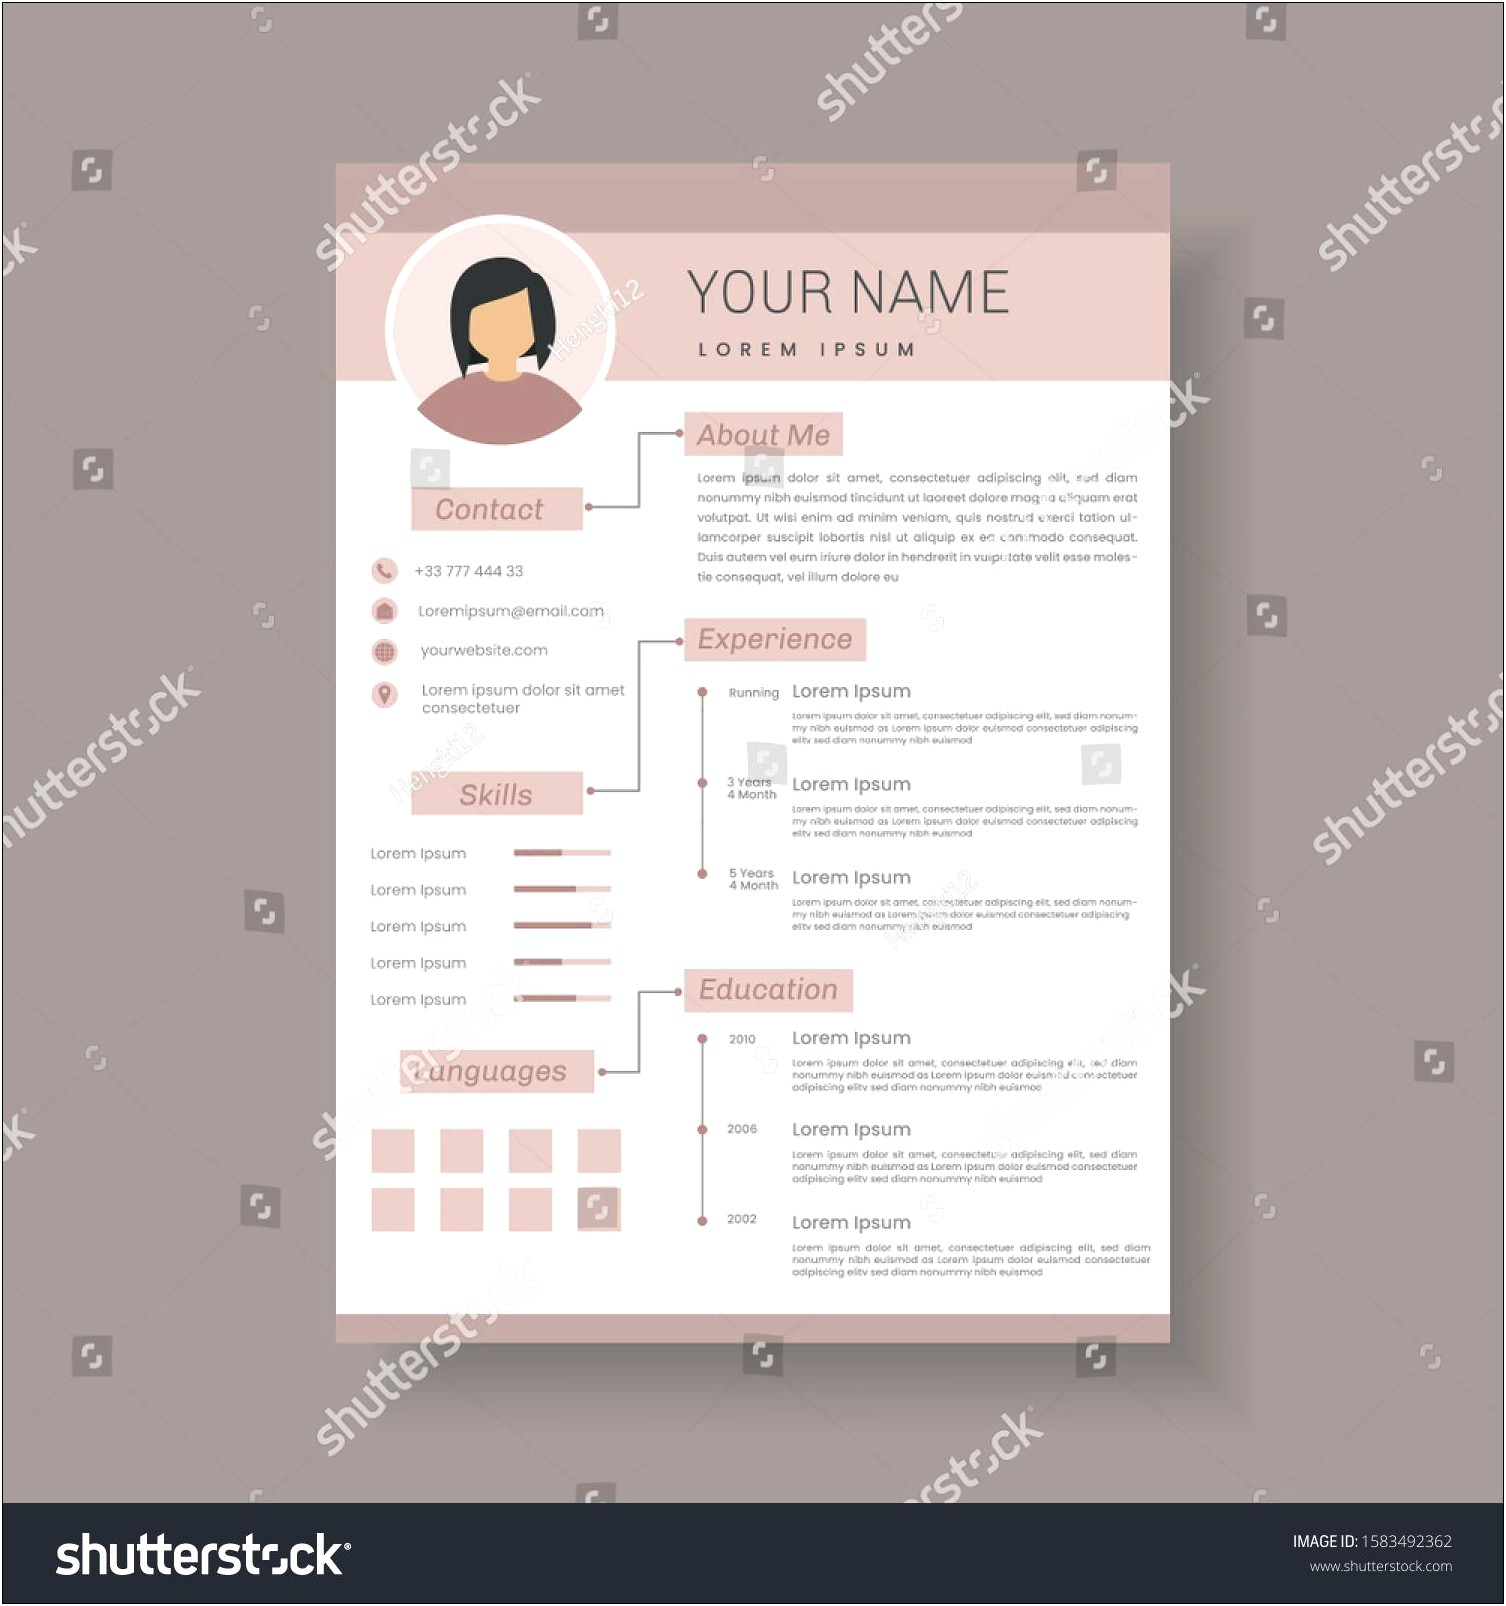 Resume Samples For Librarians Without Nletterhead